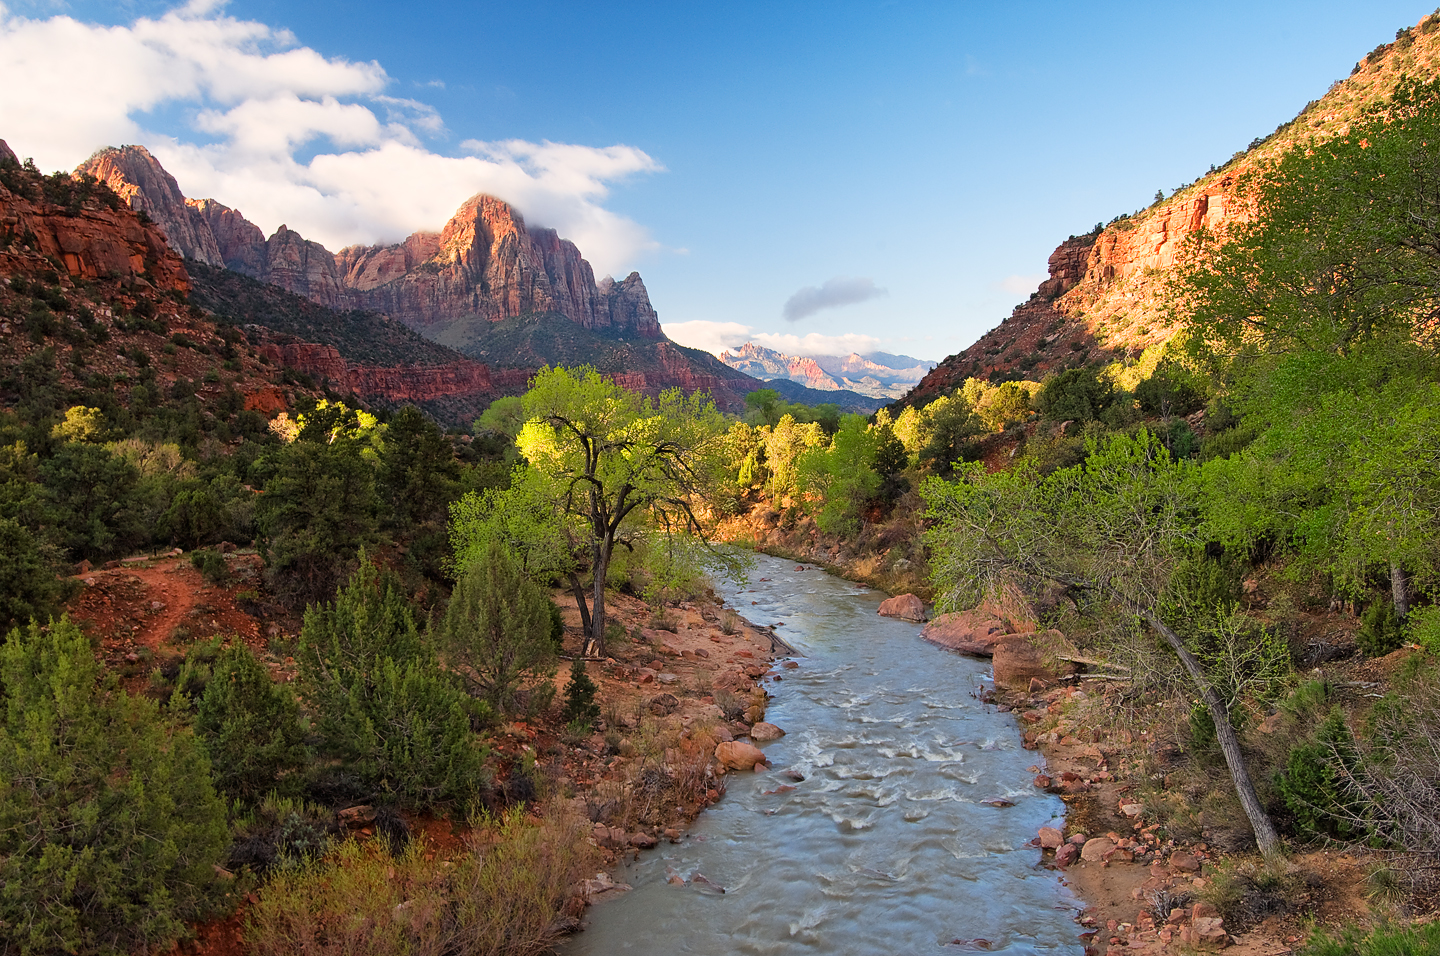 Outdoor Adventures & Attractions at Zion National Park and Springdale